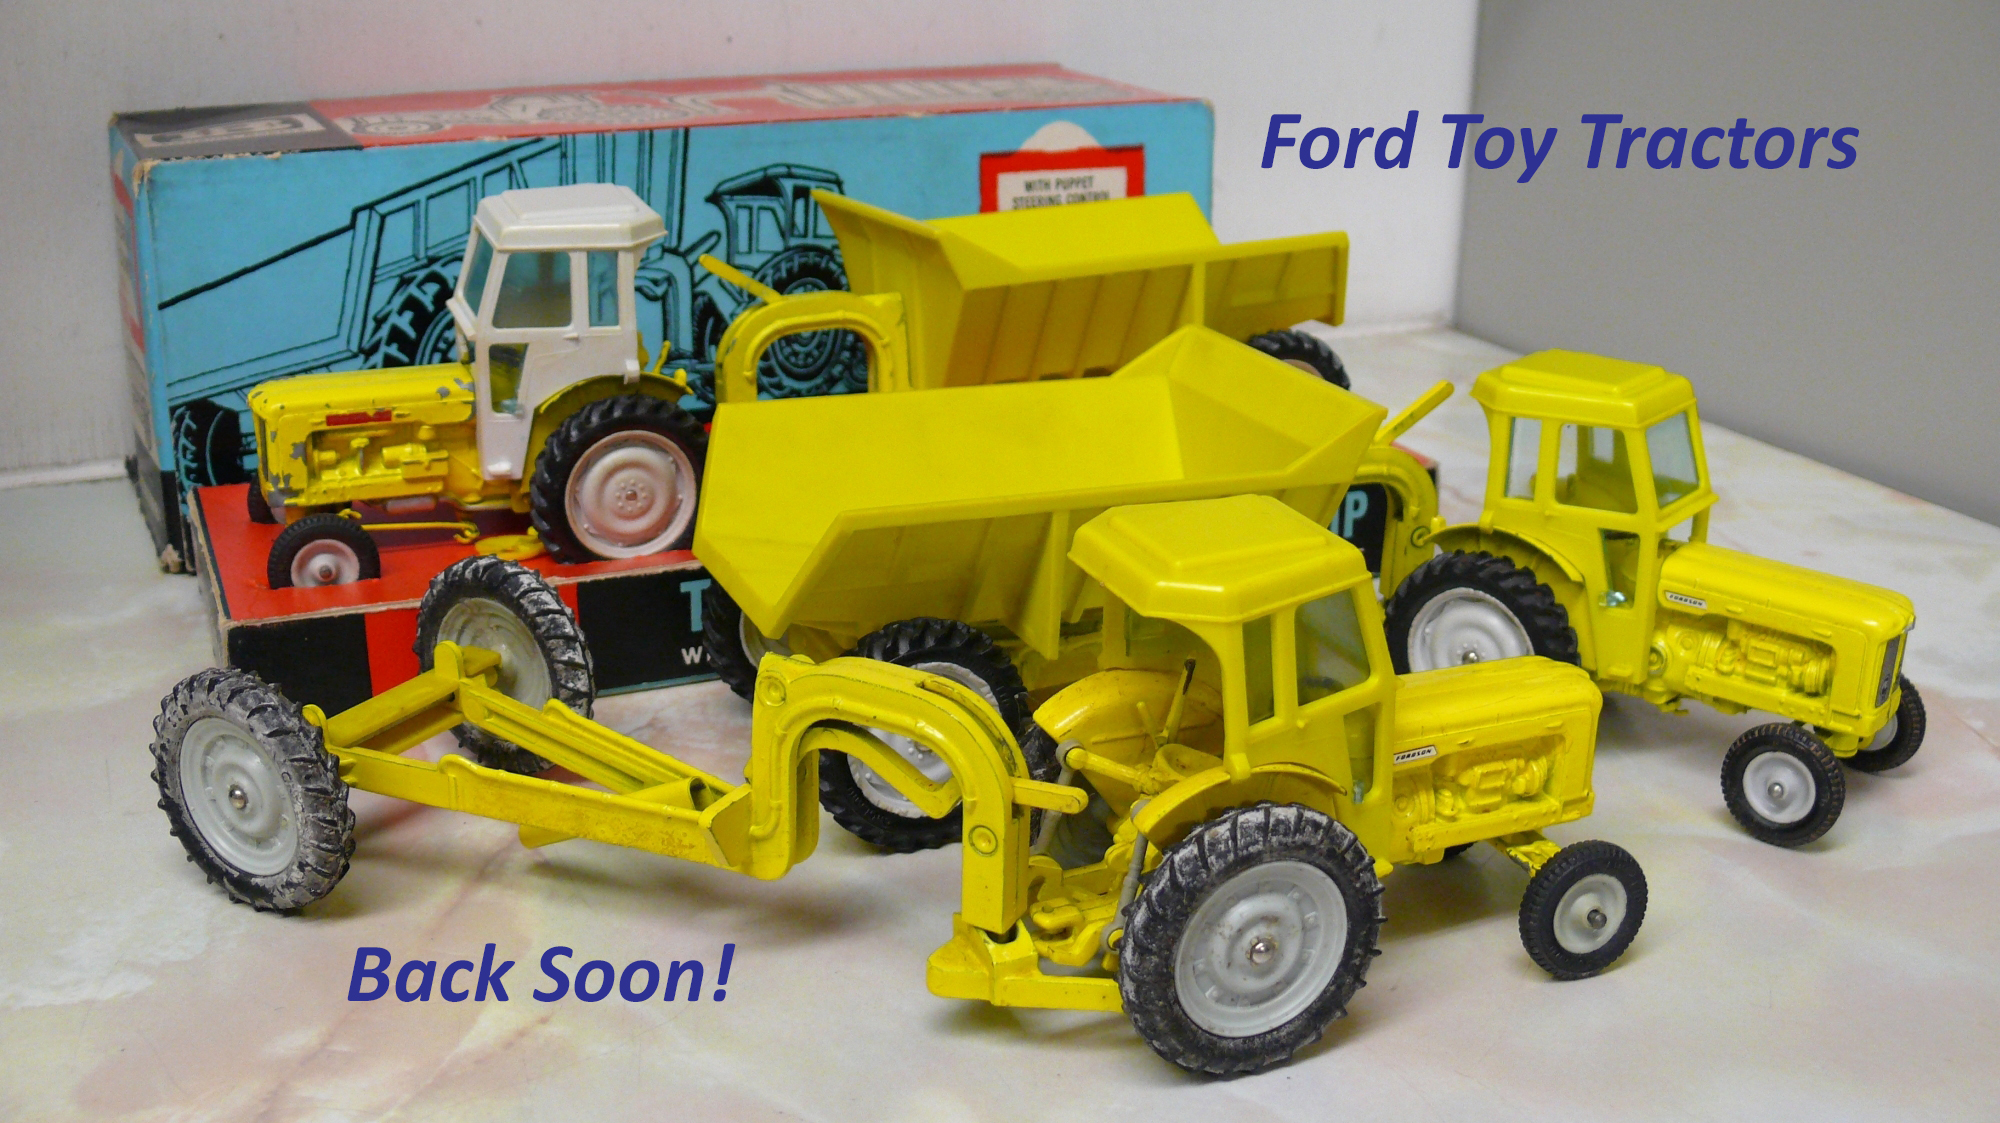 Ford Toy Tractors